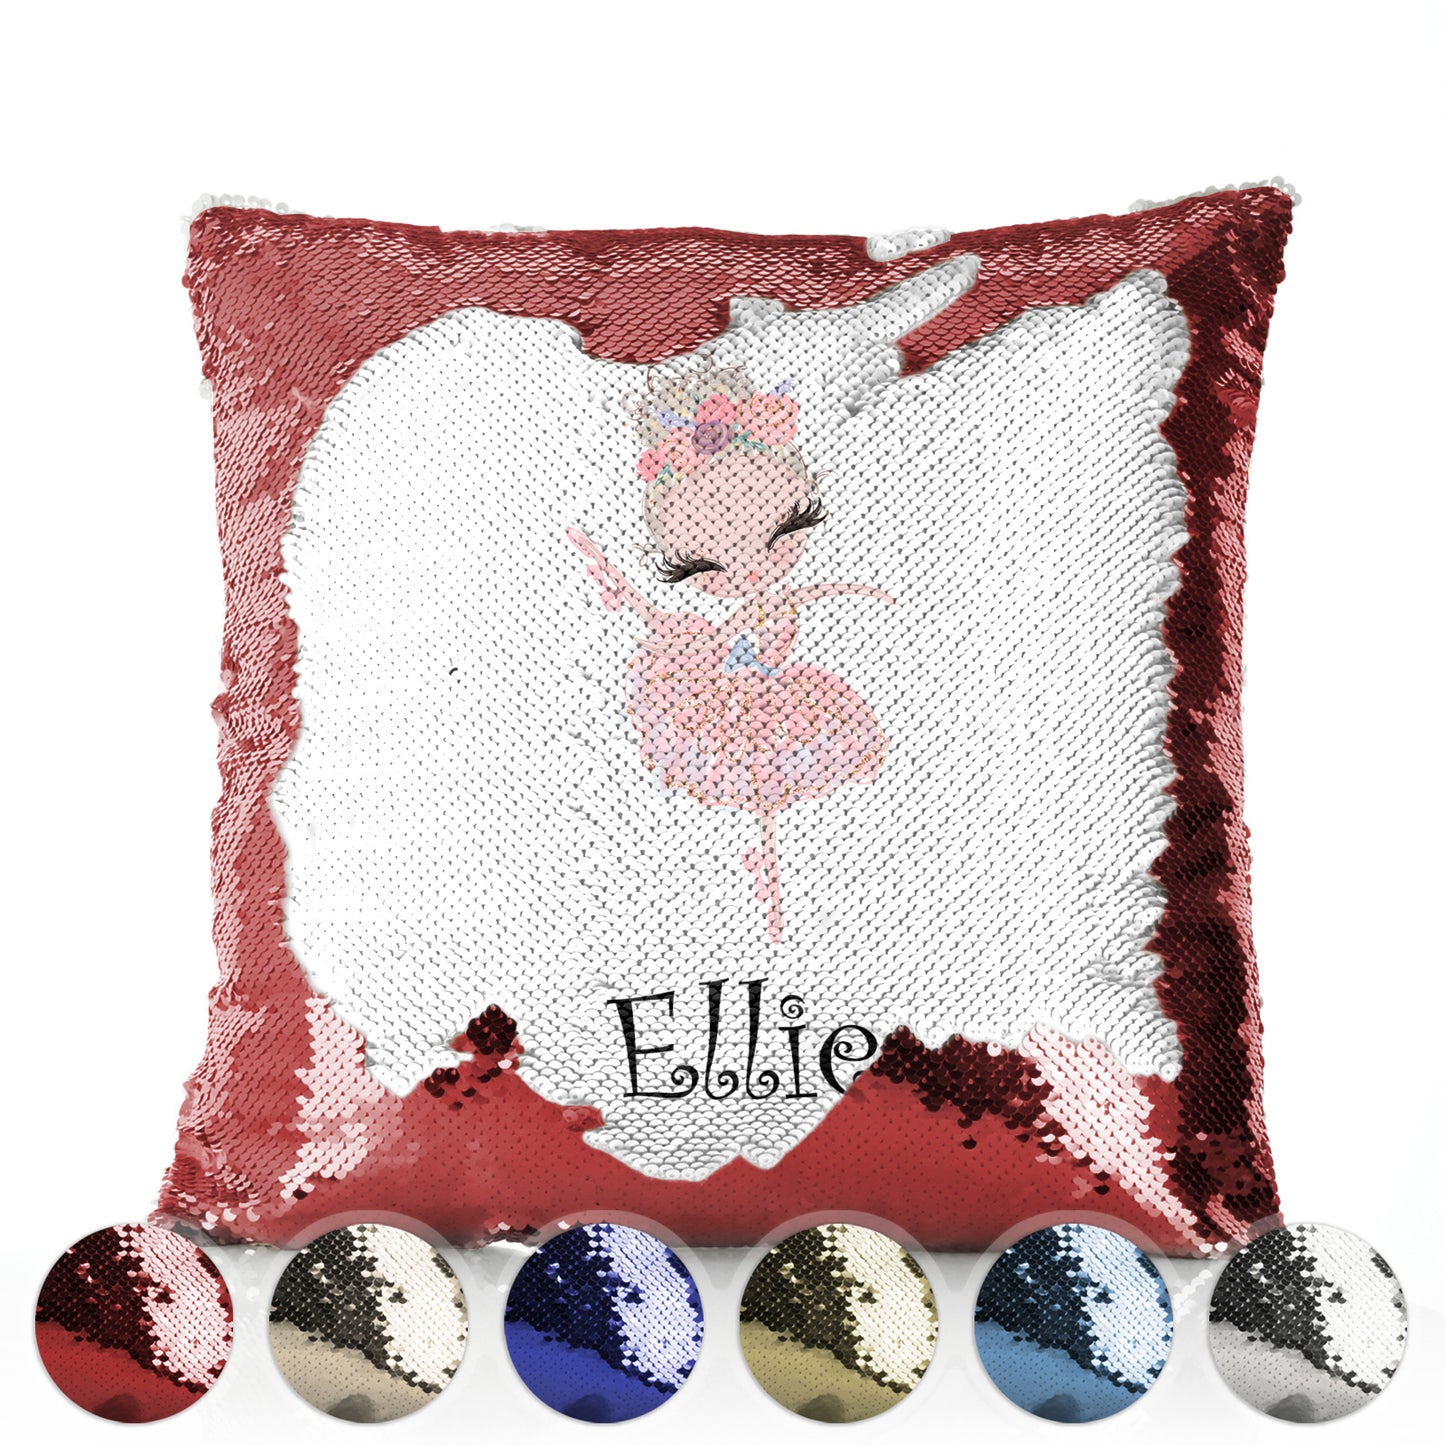 Personalised Sequin Cushion with Cute Text and Blonde Hair Pink Dress Ballerina